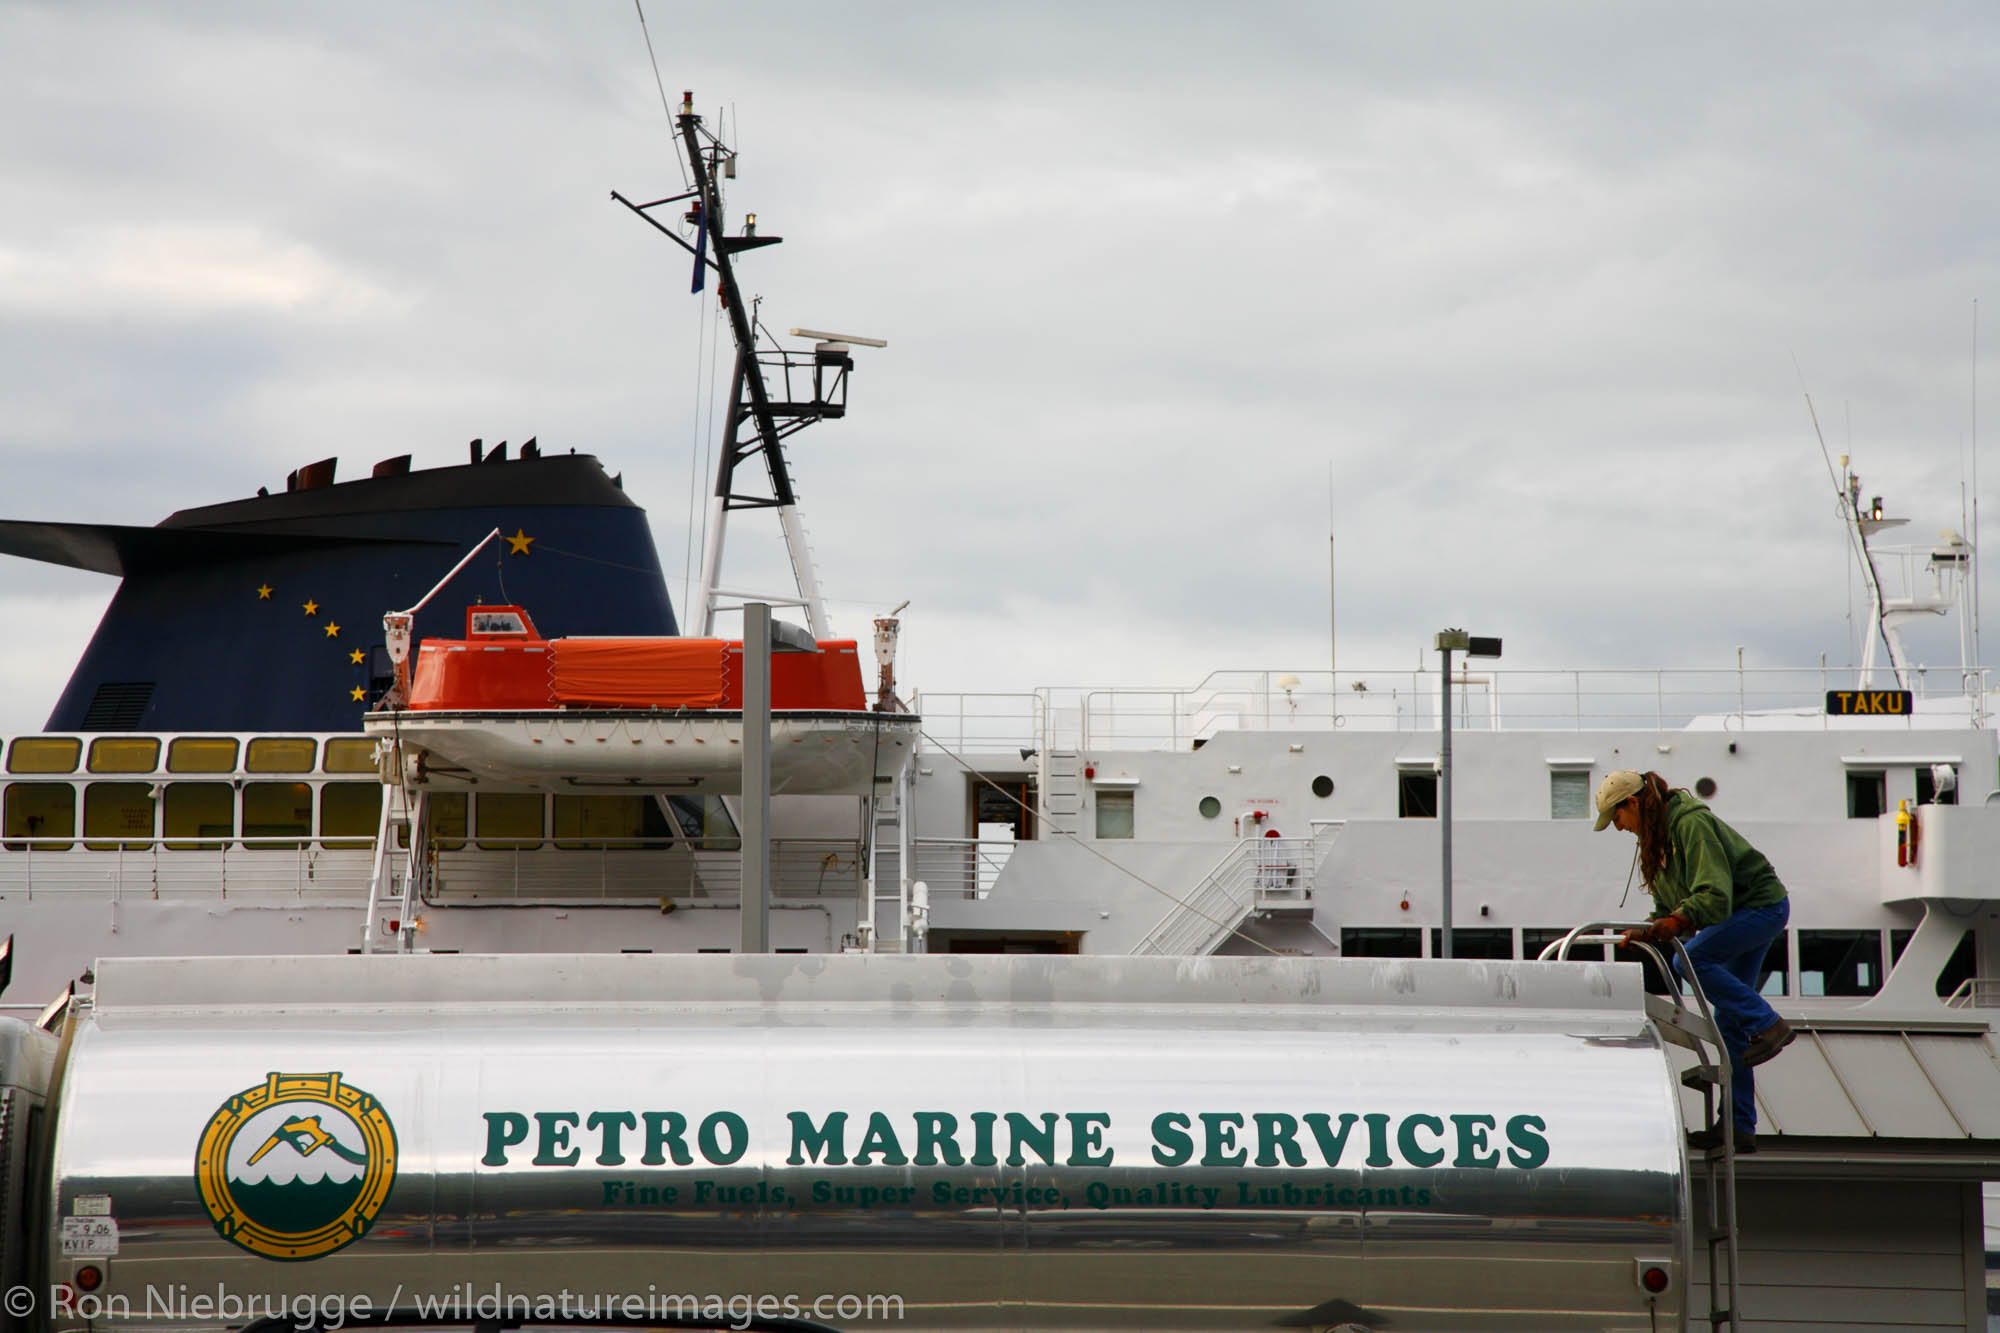 Petro Marine Services truck delivering fuel to the Alaska State Ferry, Juneau, Alaska.